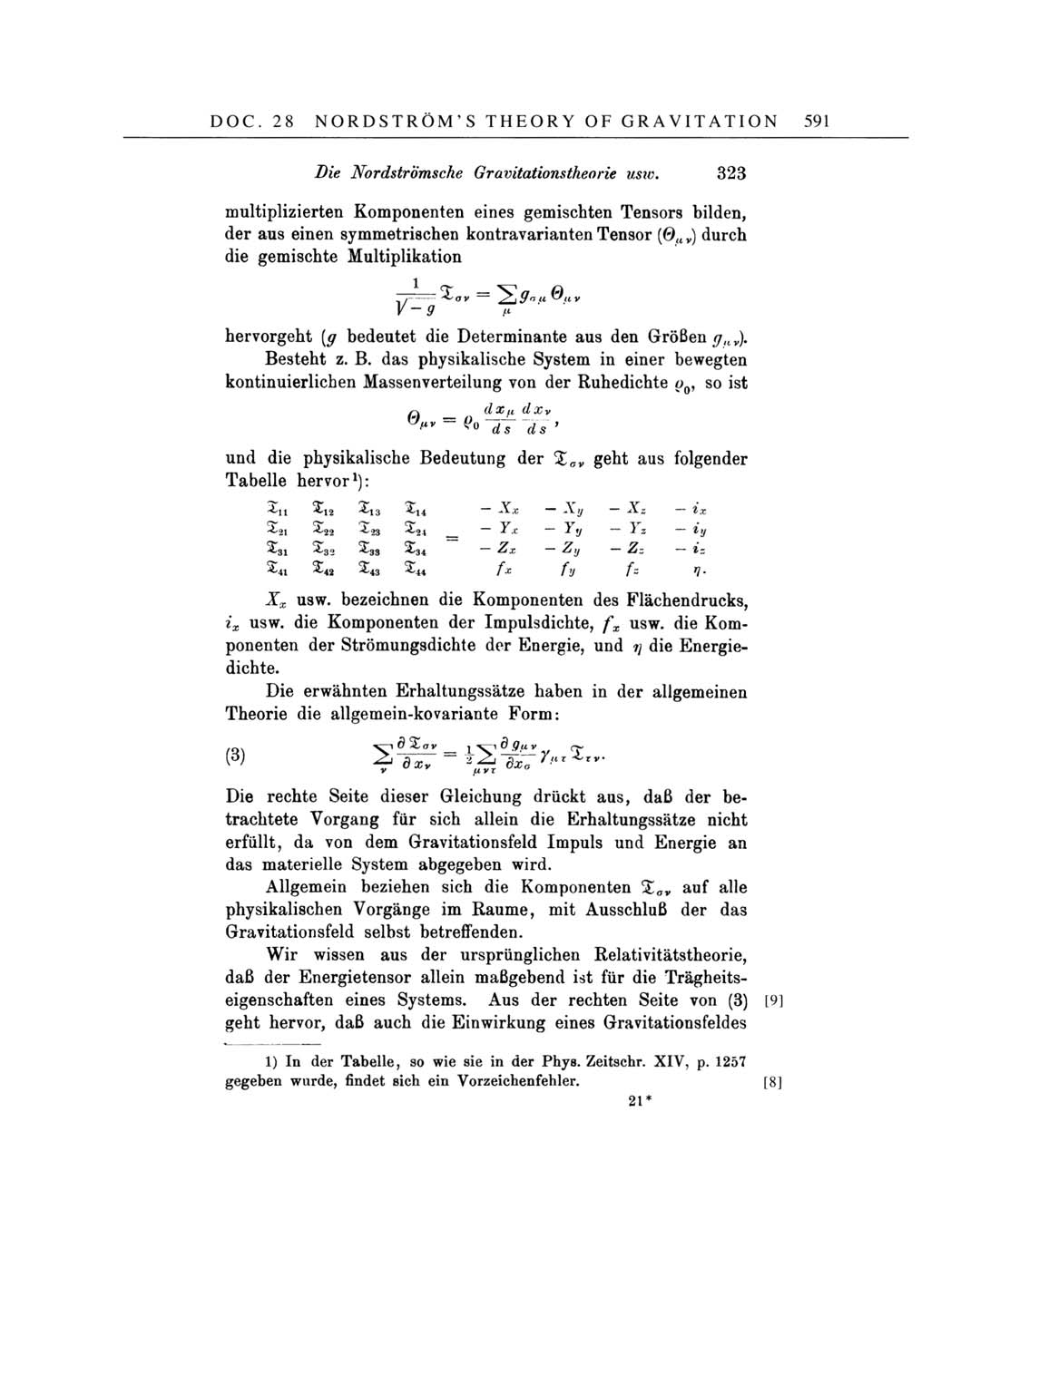 Volume 4: The Swiss Years: Writings 1912-1914 page 591